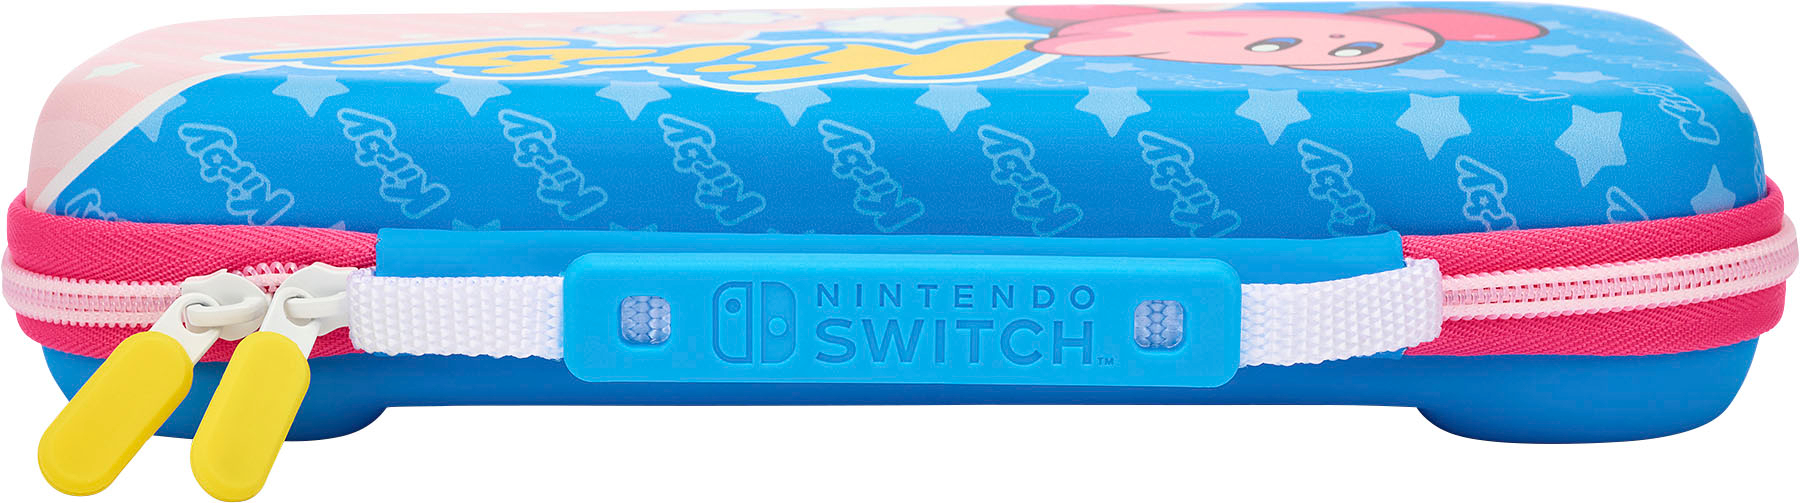 Back View: PowerA - Protection Case for Nintendo Switch - OLED Model, Nintendo Switch or Nintendo Switch Lite - Kirby